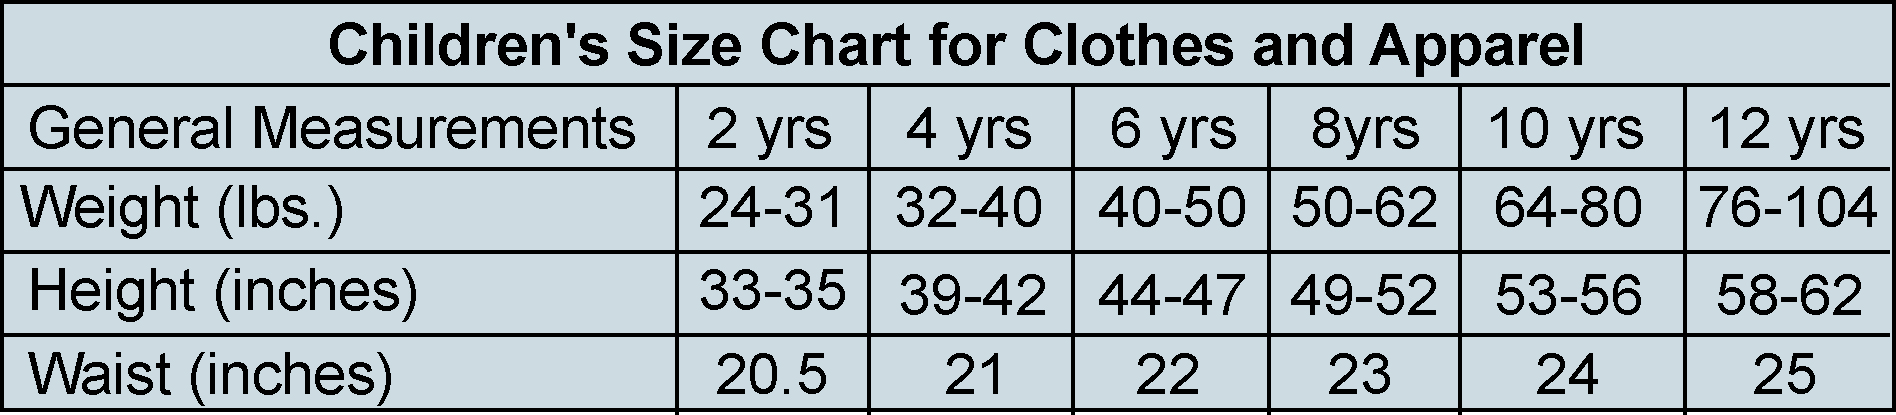 Children's Size Chart for Clothes